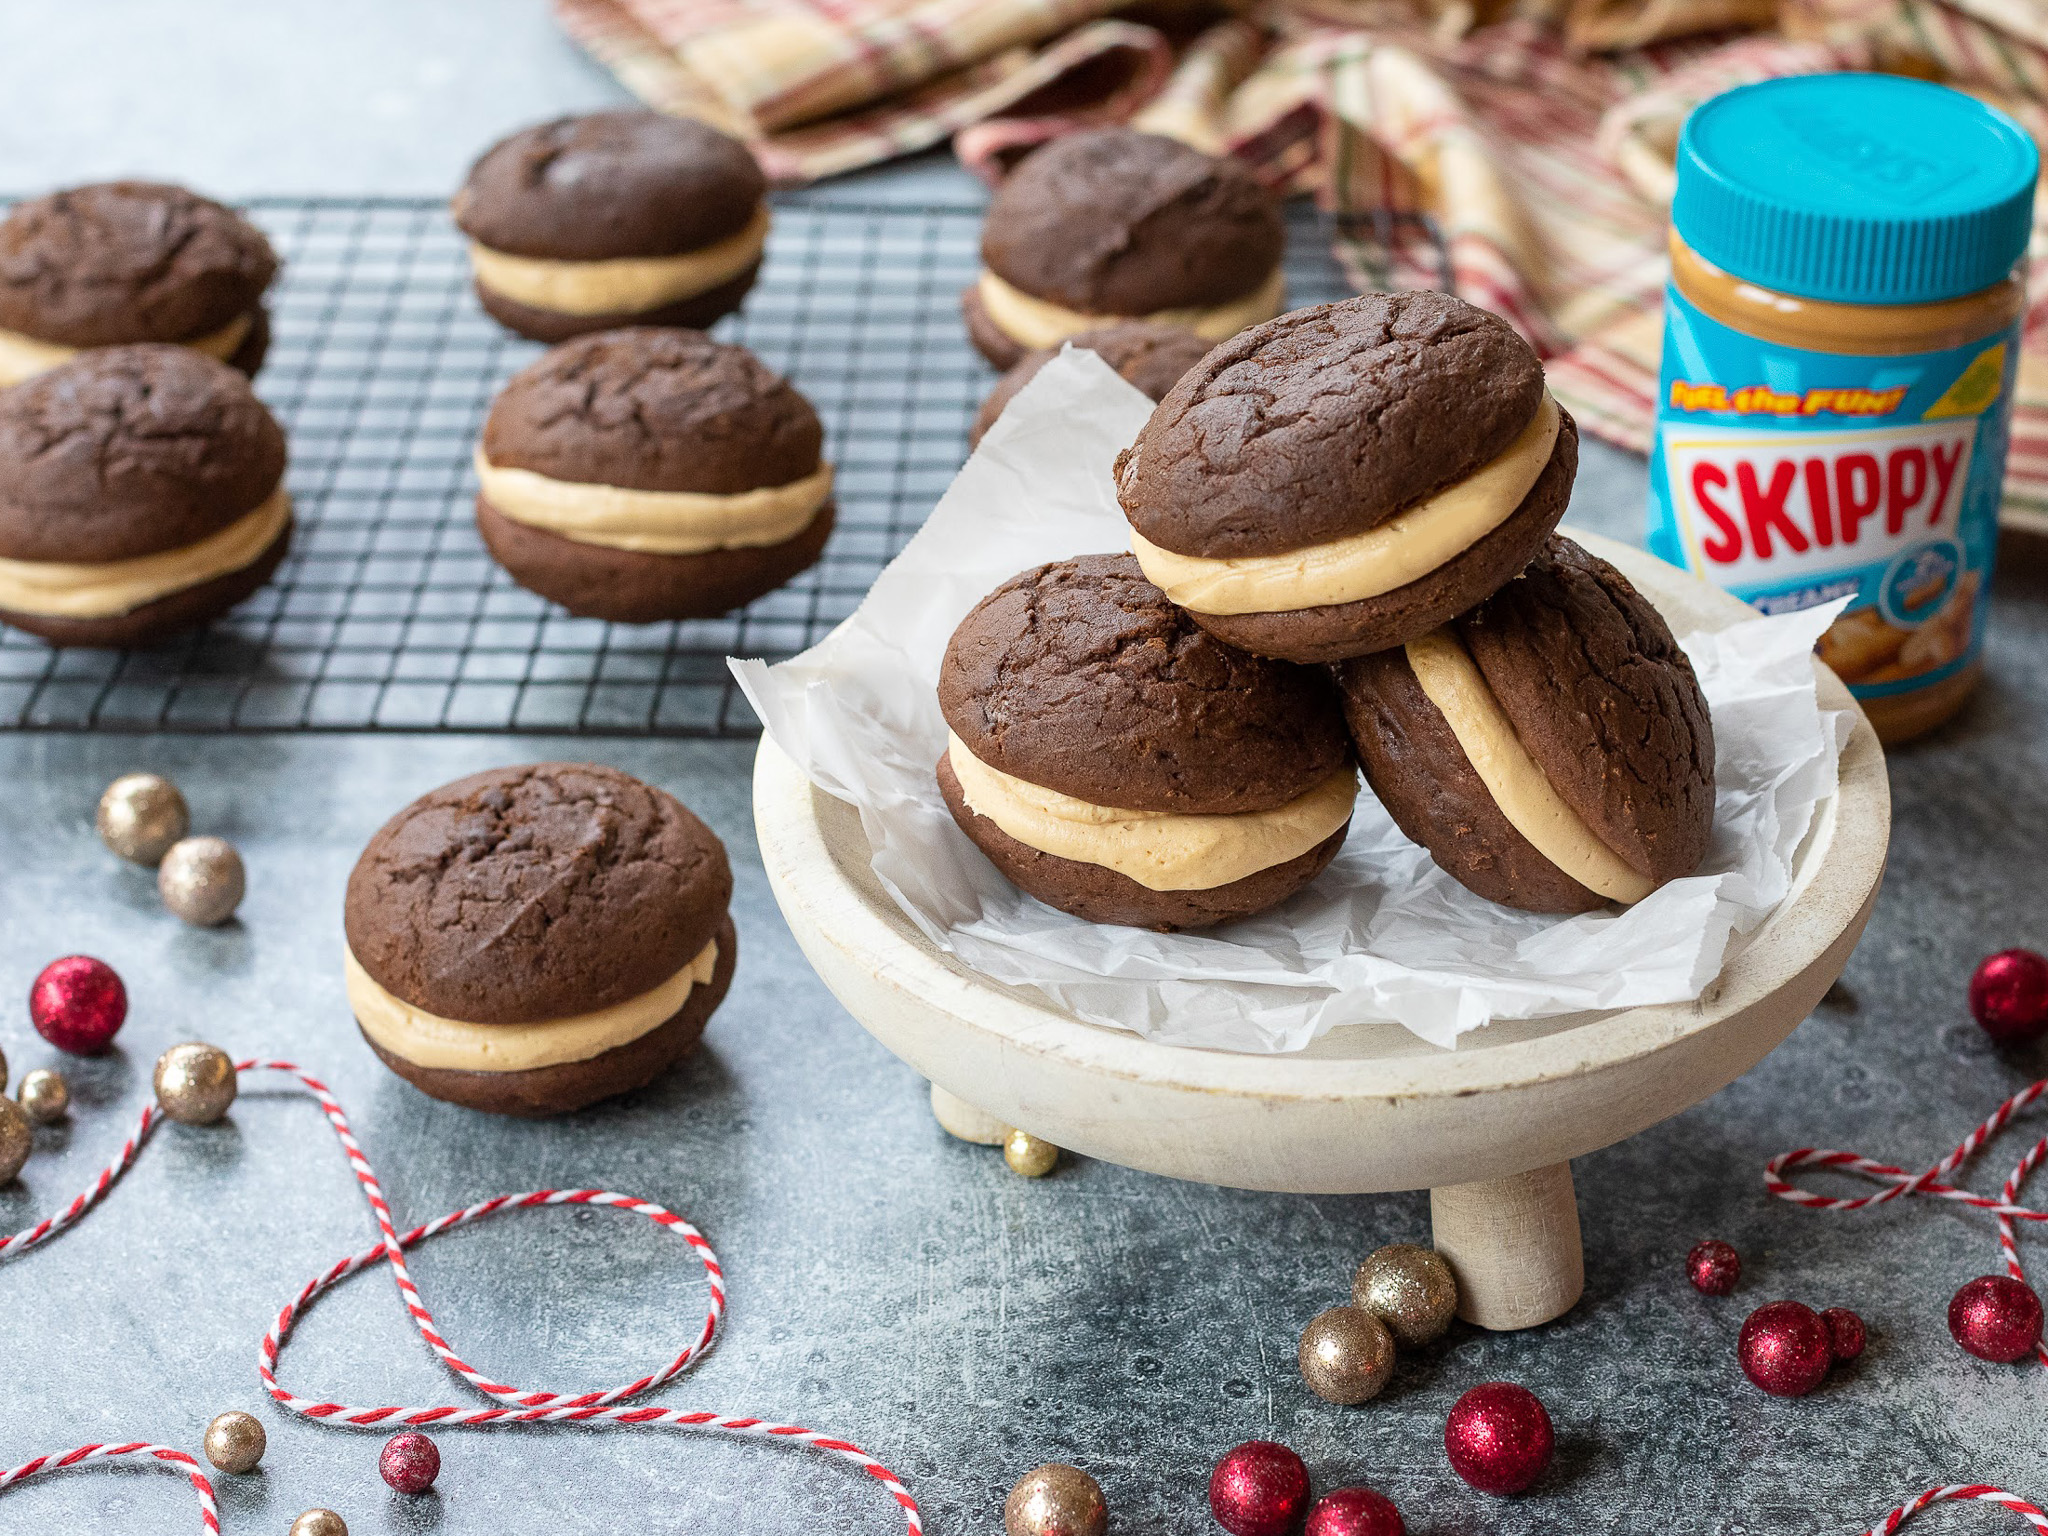 Grab SKIPPY® Peanut Butter And Whip Up Some Delicious Chocolate Peanut Butter Whoopie Pies